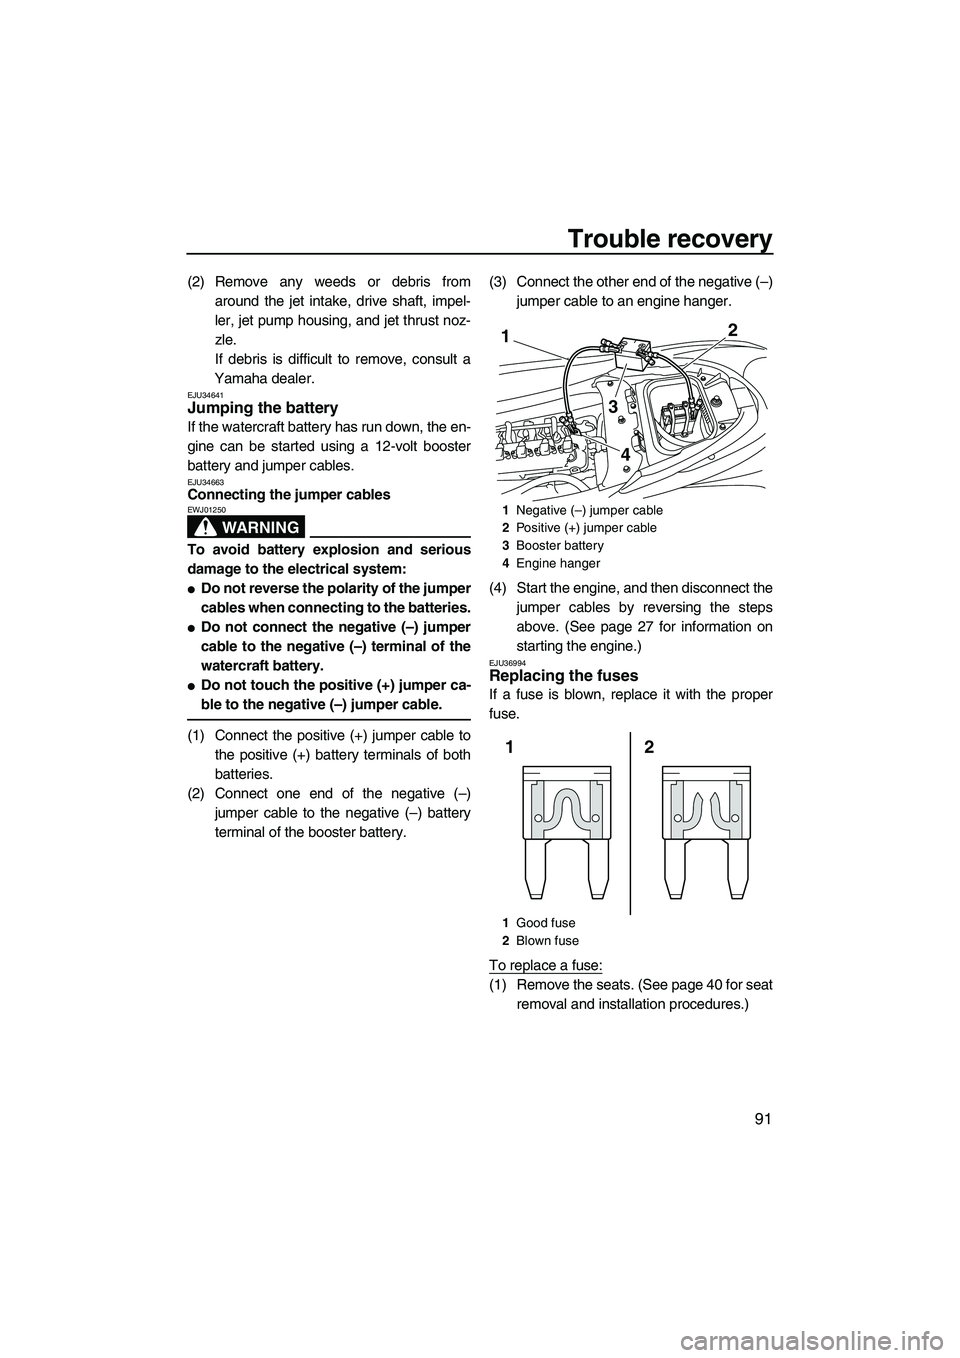 YAMAHA FZR 2012  Owners Manual Trouble recovery
91
(2) Remove any weeds or debris from
around the jet intake, drive shaft, impel-
ler, jet pump housing, and jet thrust noz-
zle.
If debris is difficult to remove, consult a
Yamaha de